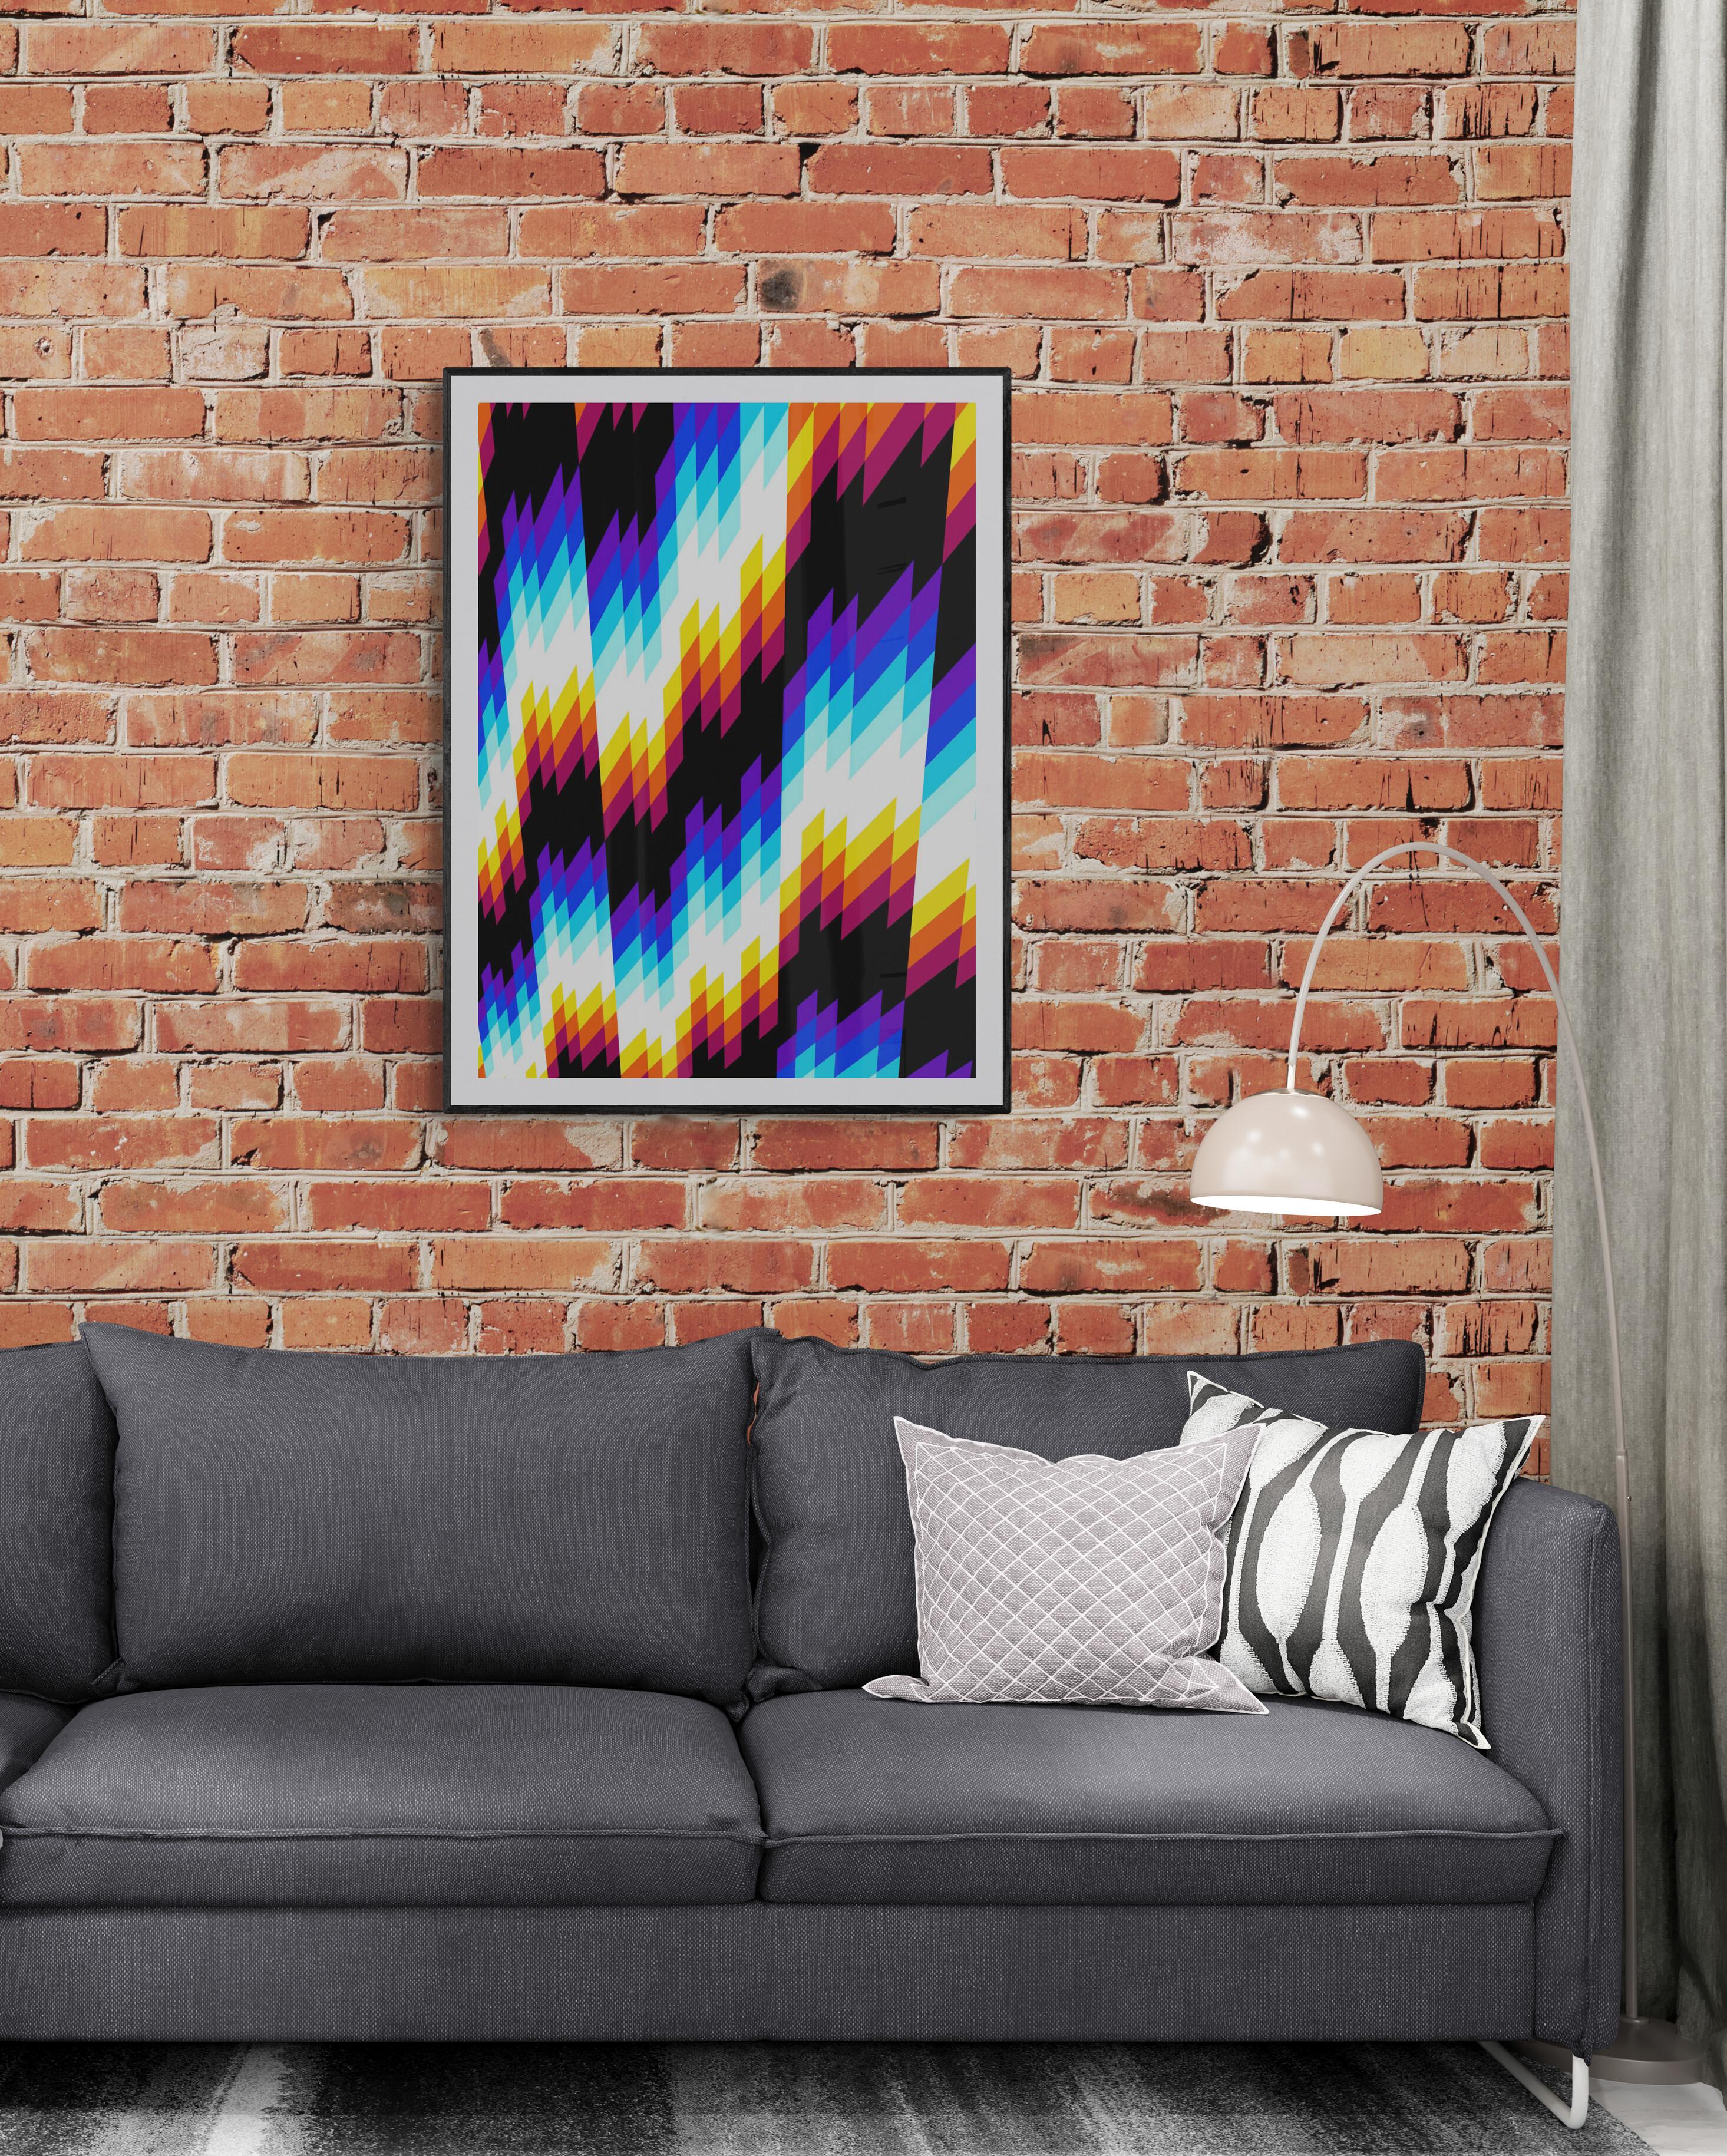 Felipe Pantone CHROMADYNA MICAP #5
Date of creation: 2020
Medium: Lithograph on paper
Edition number: 24/30
Size: 75.5 x 55.5 cm
Condition: New, in mint condition and never framed
Lithograph on paper hand signed and numbered on the back by the